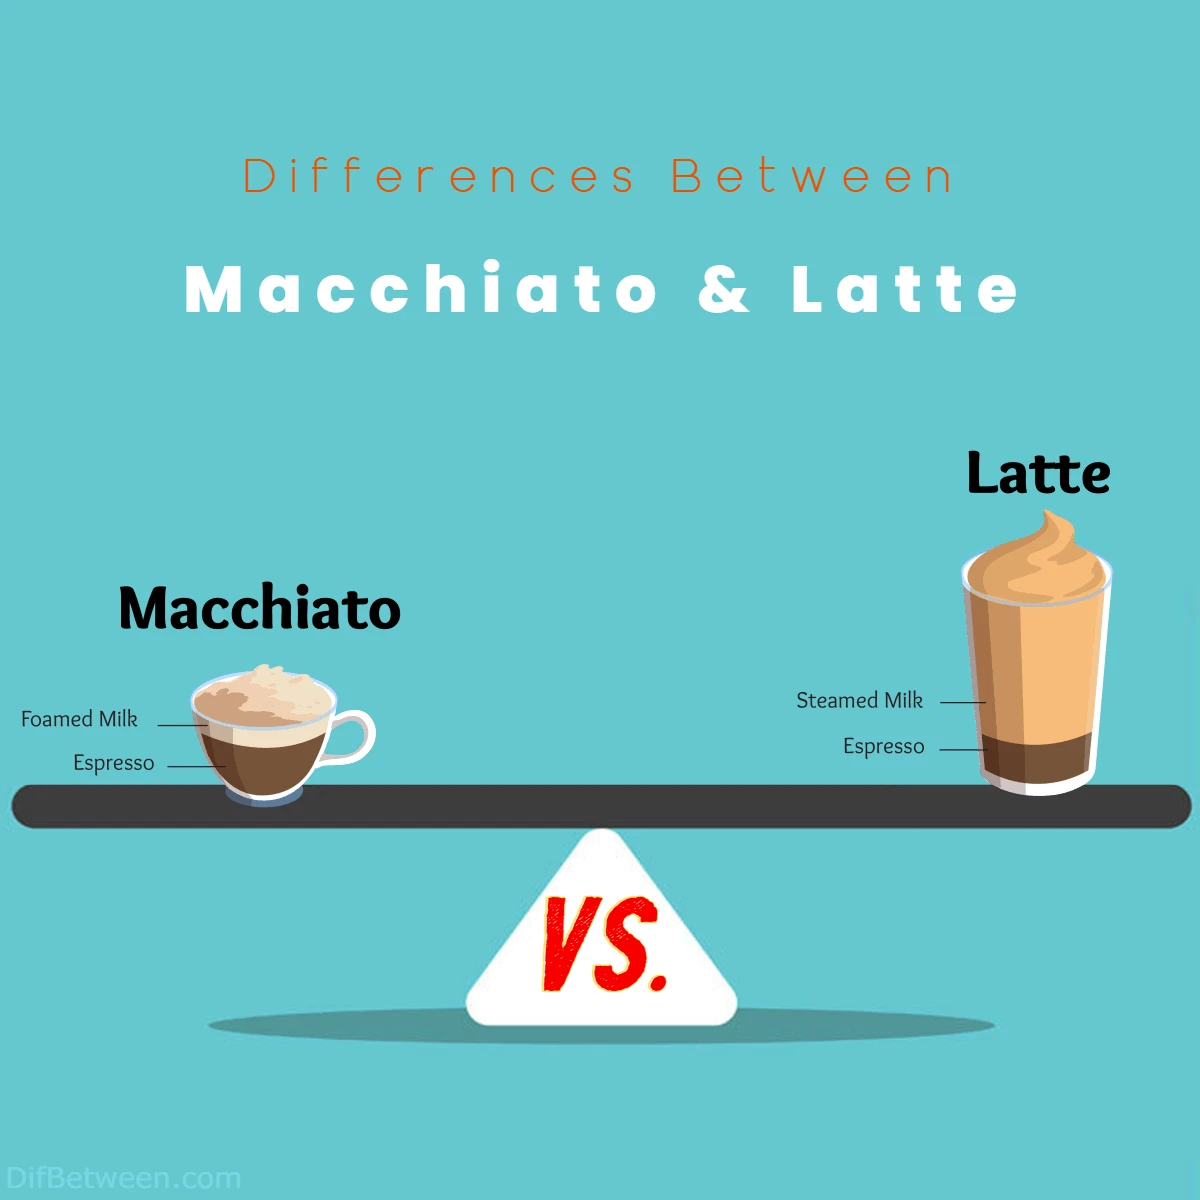 Differences Between Latte and Macchiato